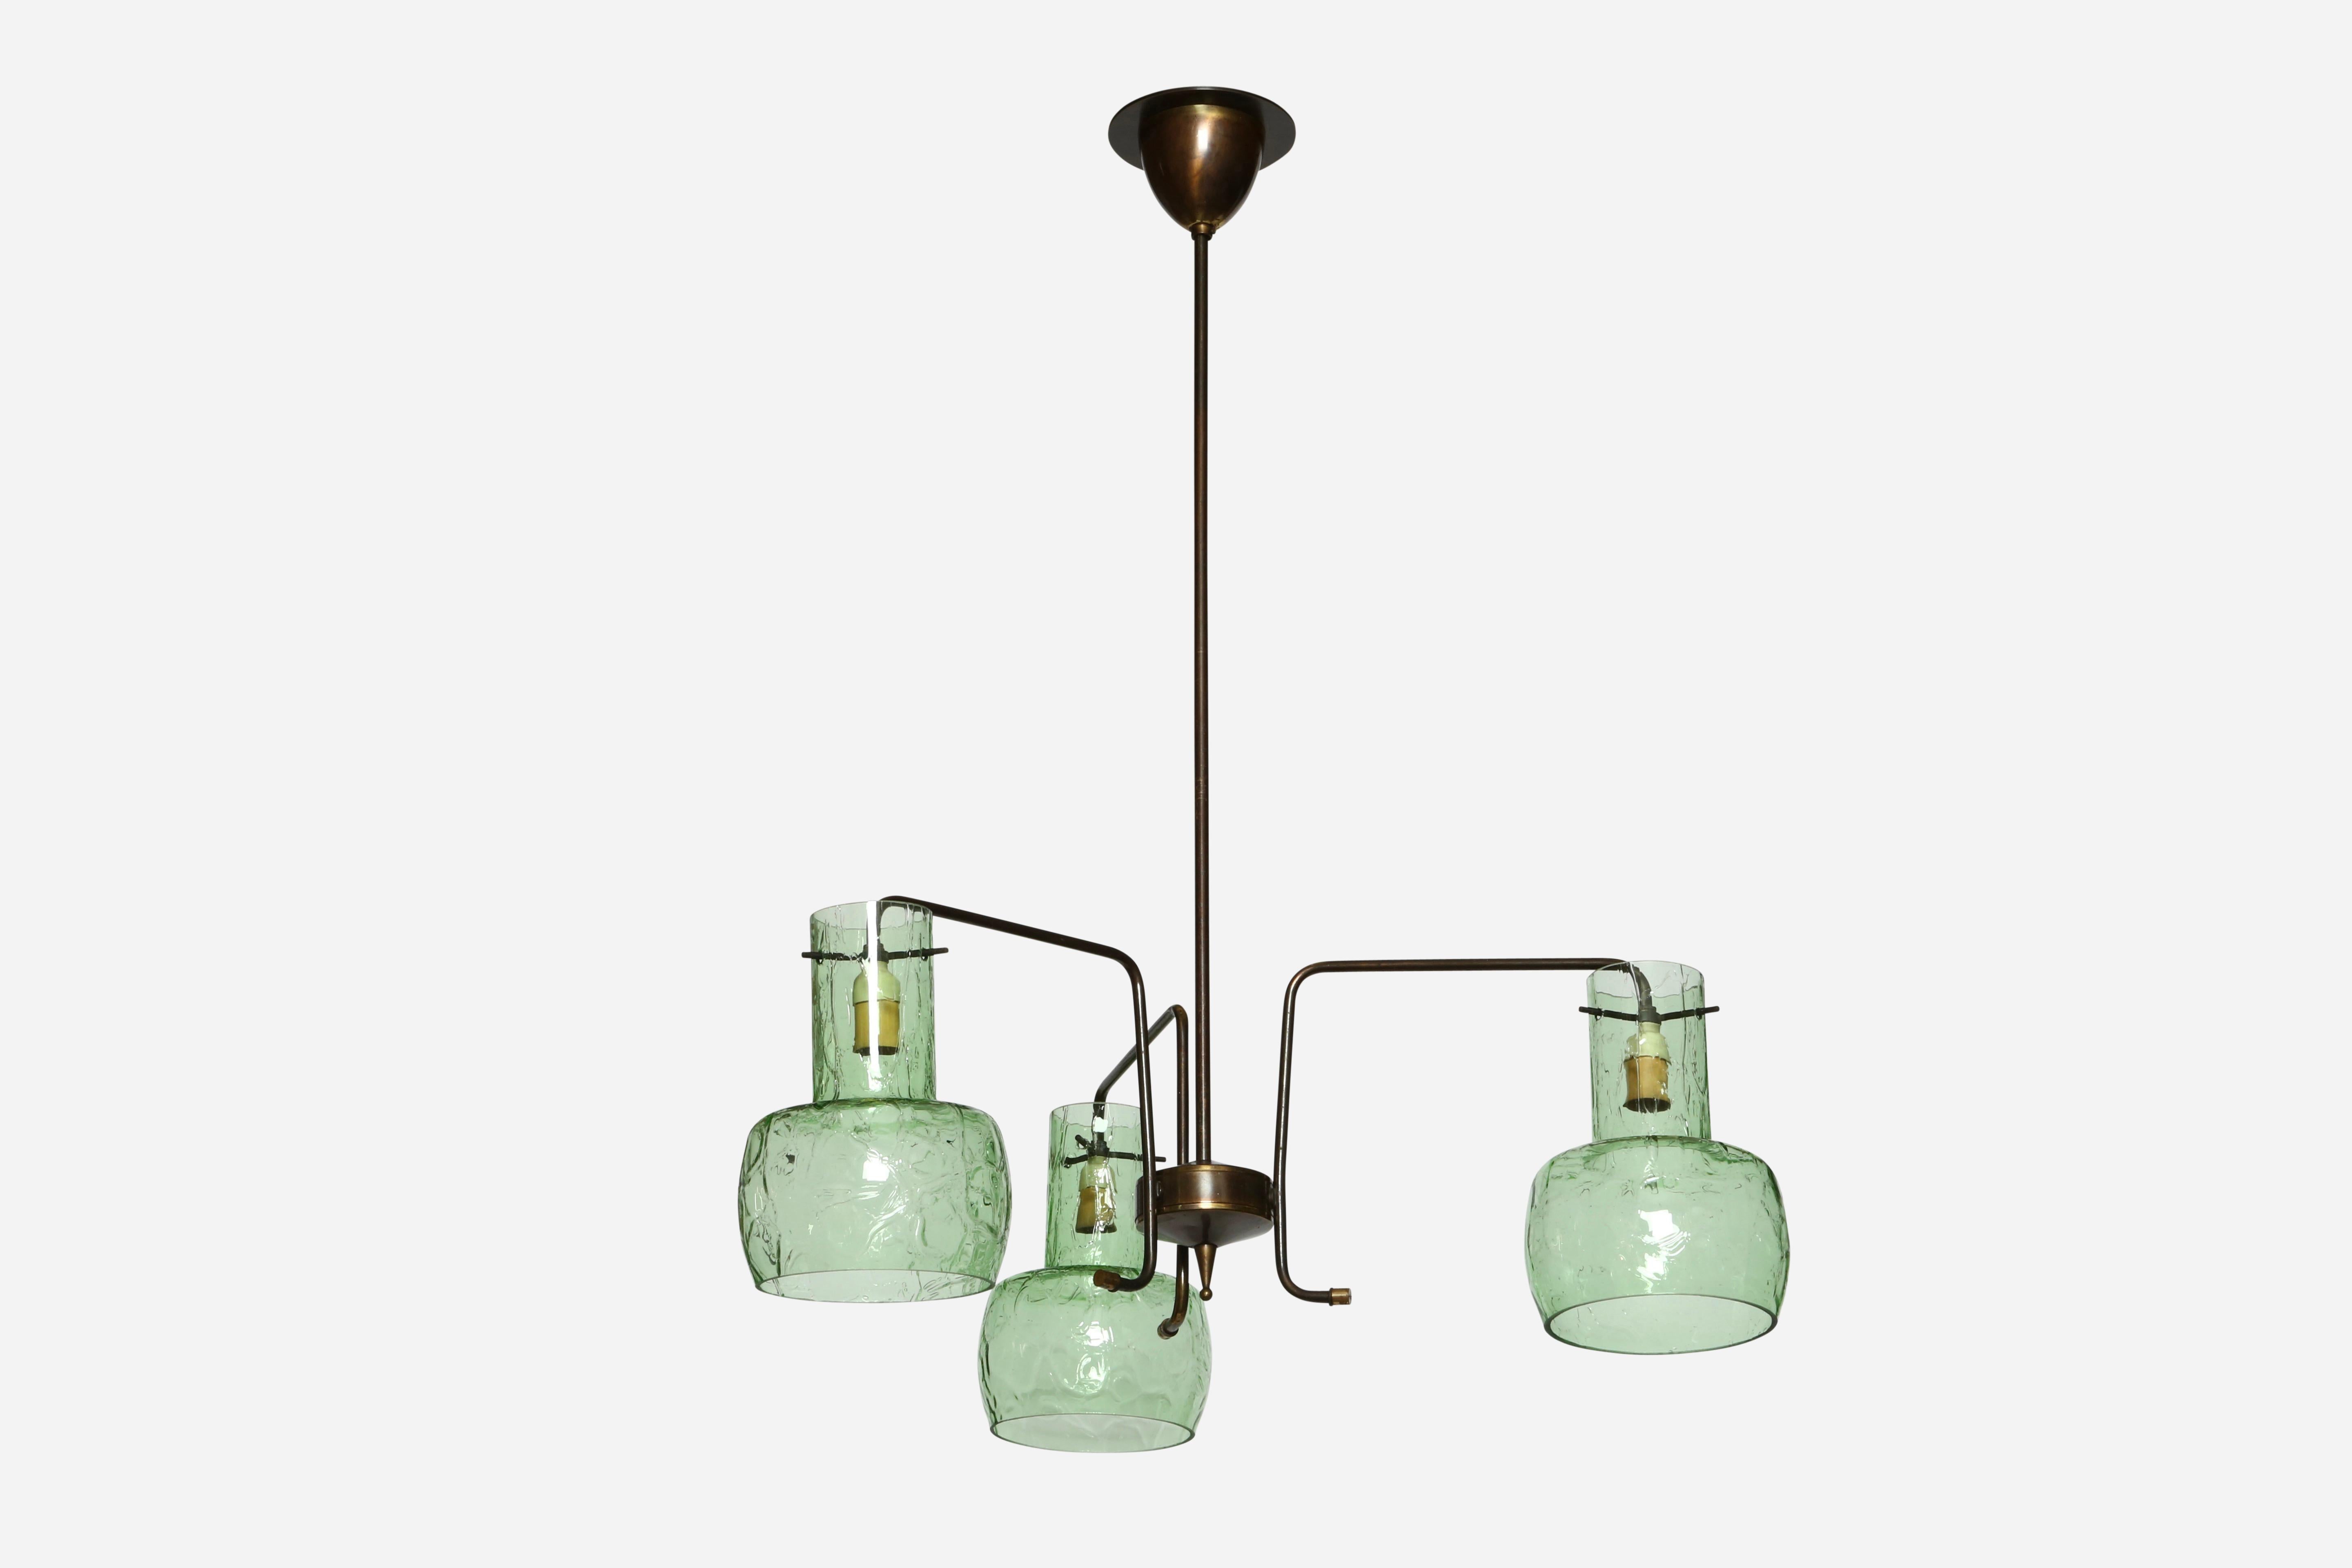 Murano glass suspension light.
Designed and made in Italy, 1960s
Handblown glass, patinated brass.
Three candelabra sockets.
Complimentary US rewiring upon request.
Height is adjustable.
Body is 9.5 inches.

We take pride in bringing vintage